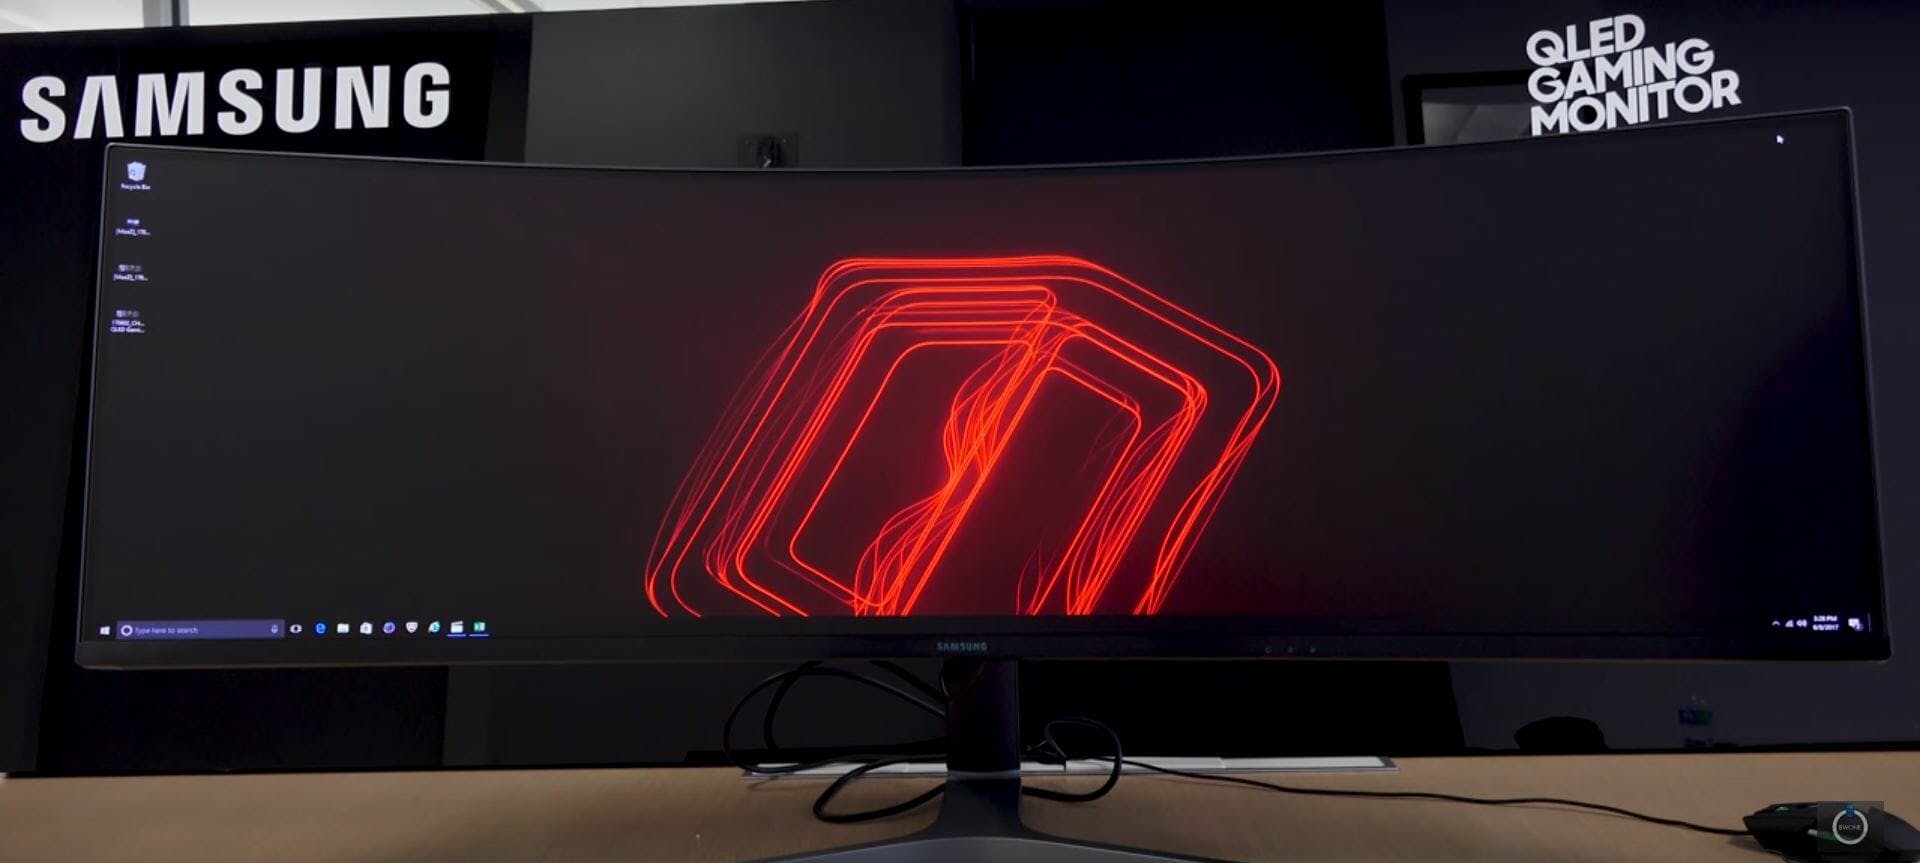 49-inch curved display